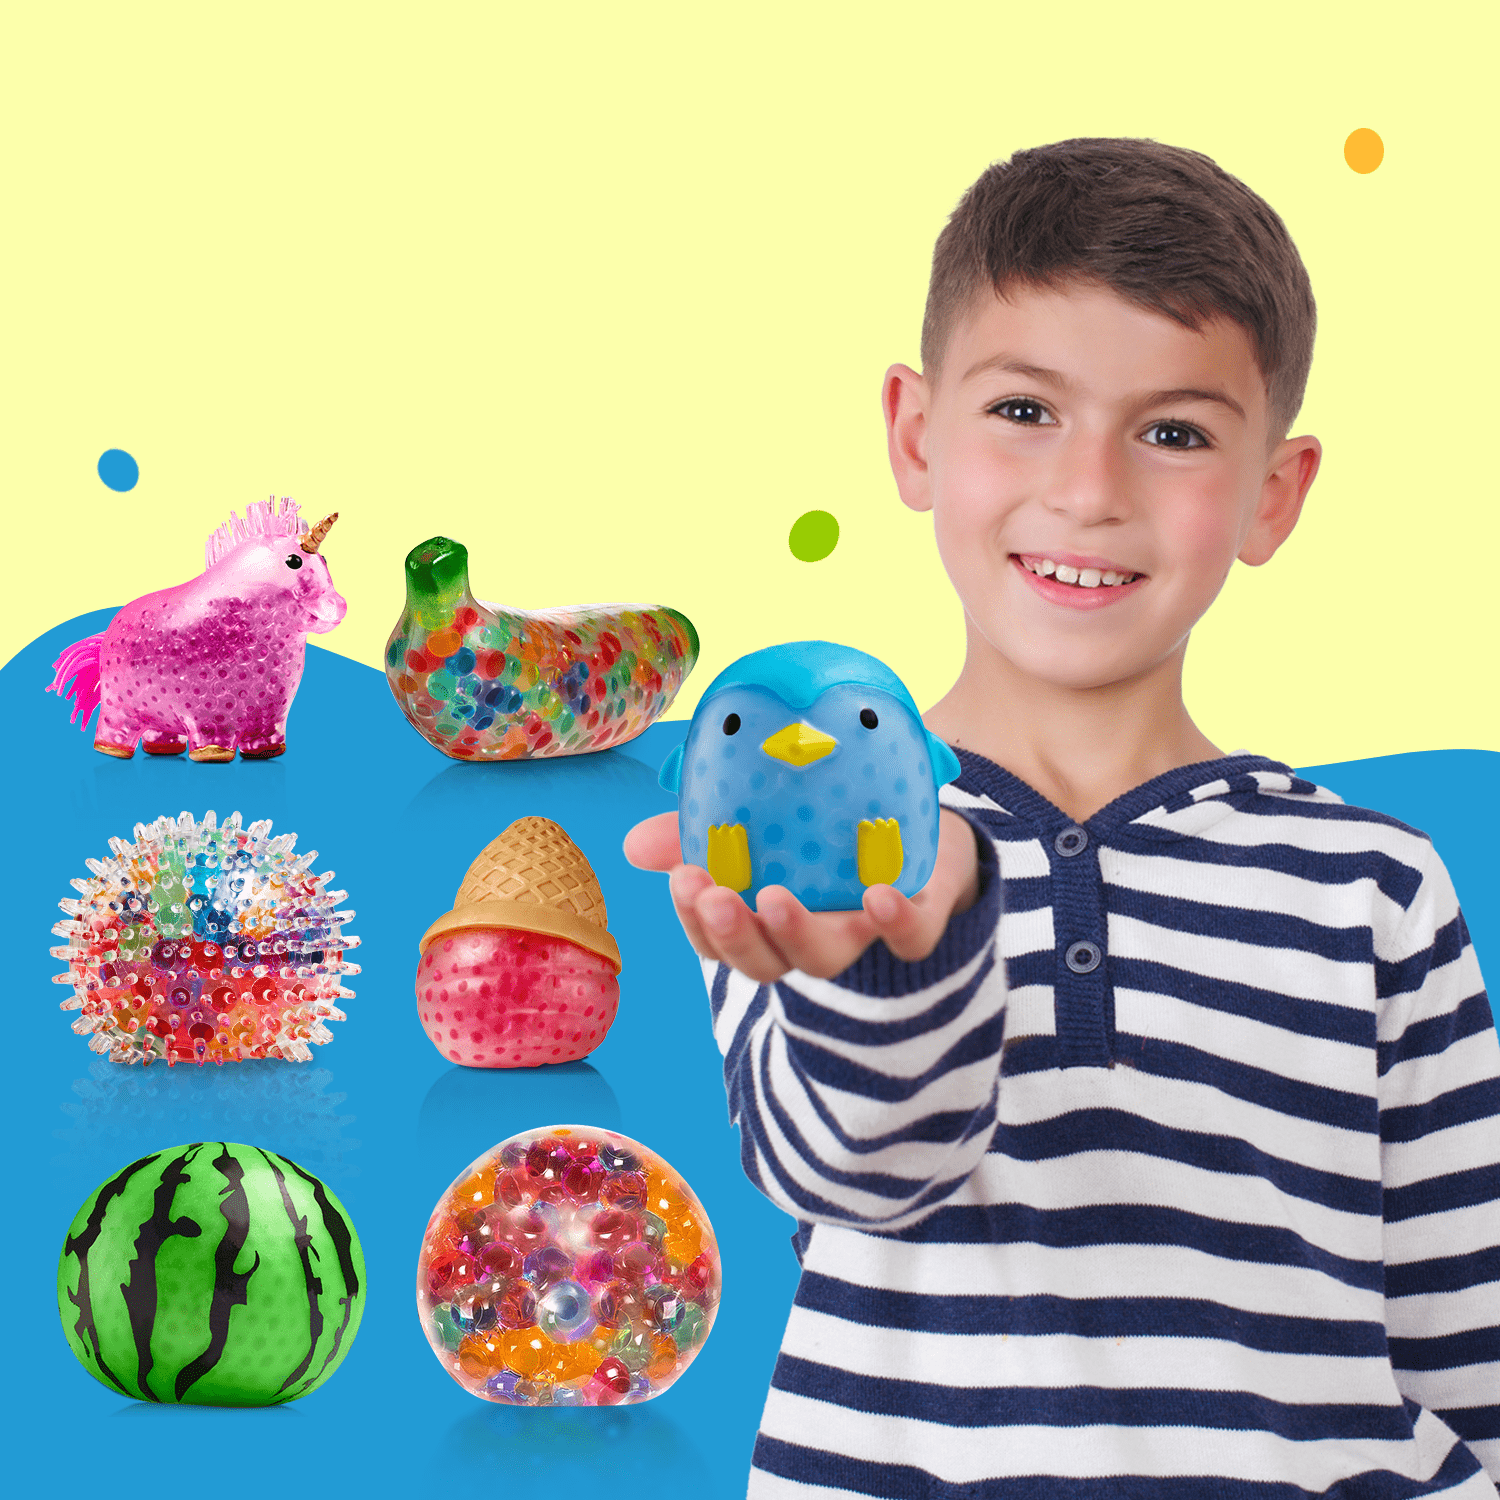 An adorable boy holds a Beadezz, an animal-shaped squishy children's toy filled with water beads